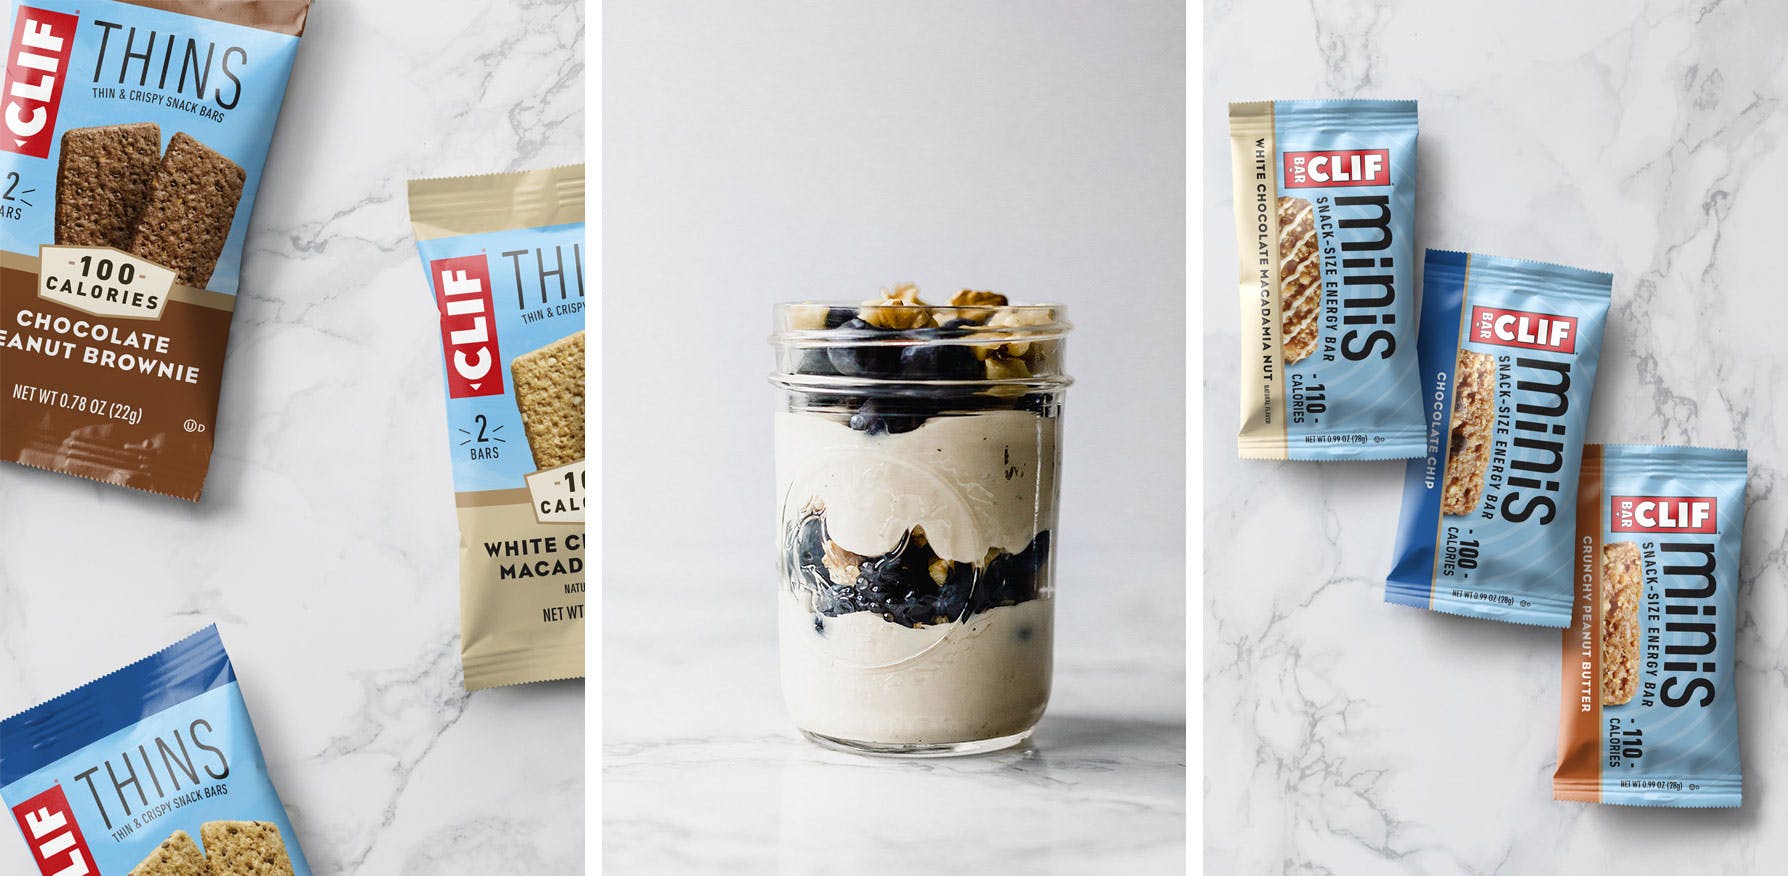 CLIF Thins, yogurt and berries, and CLIF BAR Minis